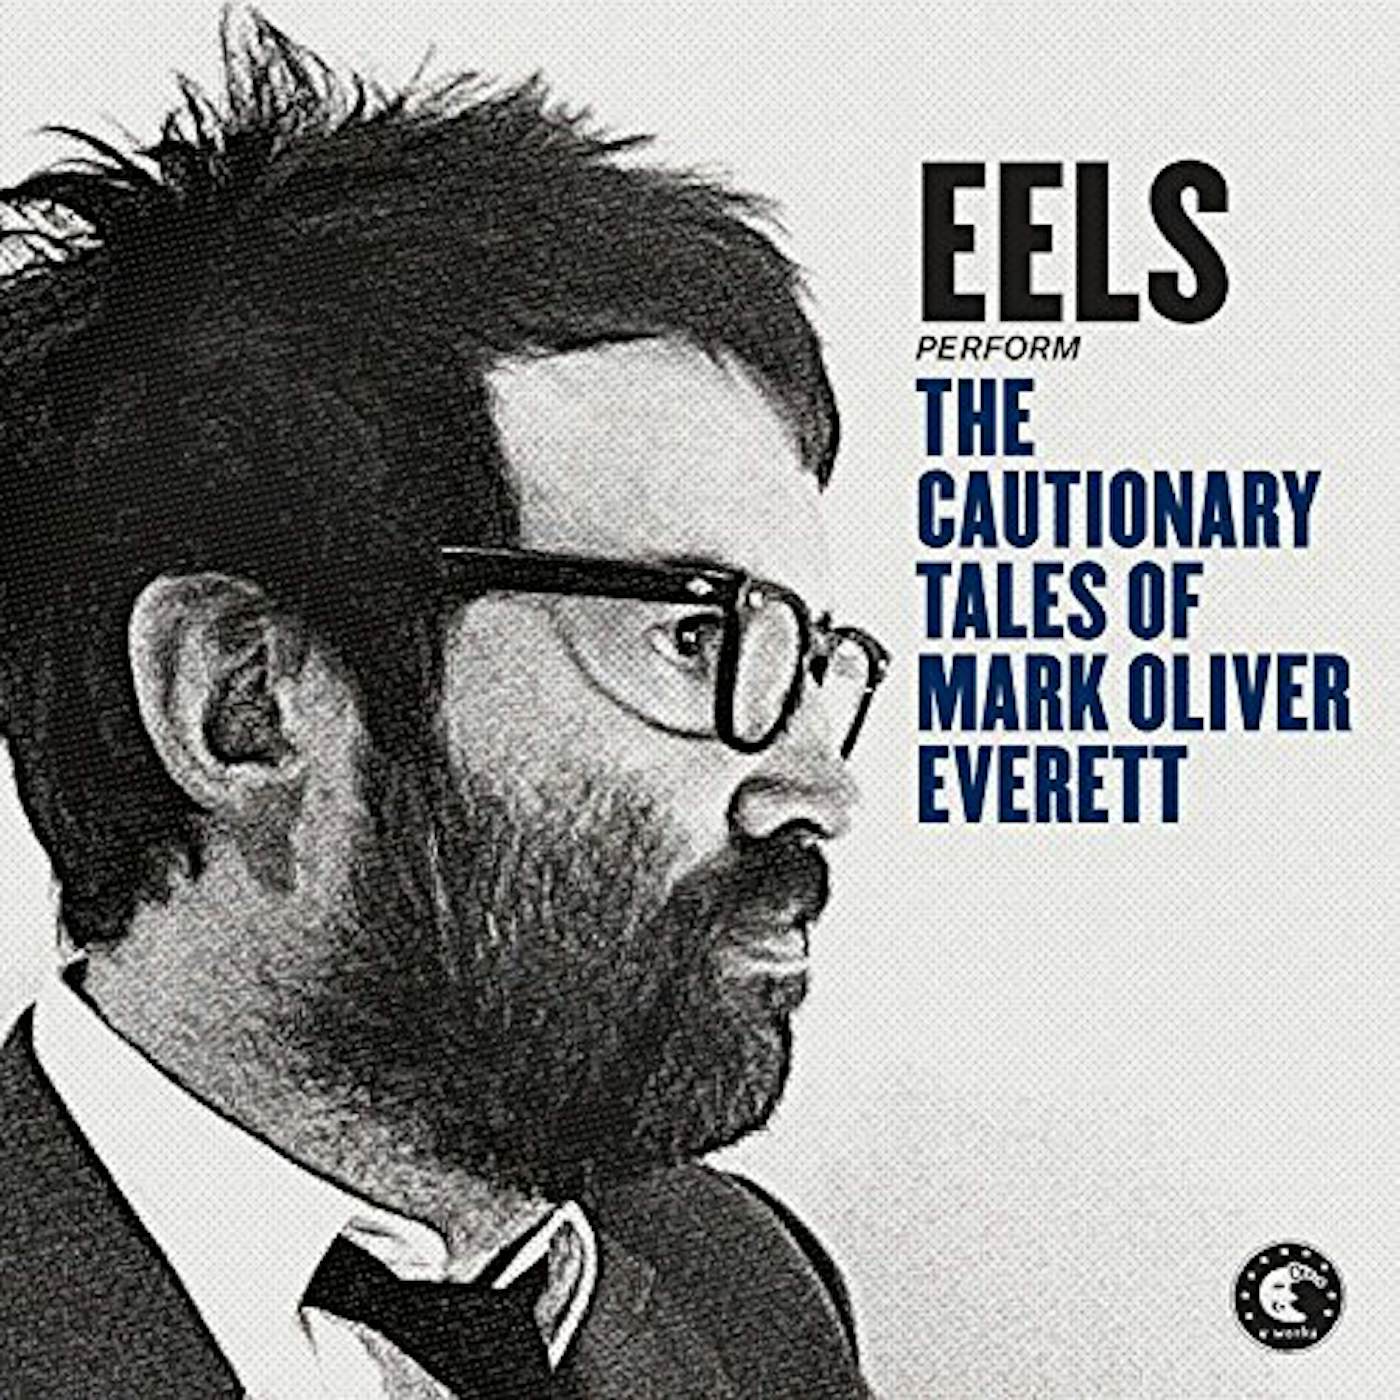 Eels CAUTIONARY TALES OF MARK OLIVE CD